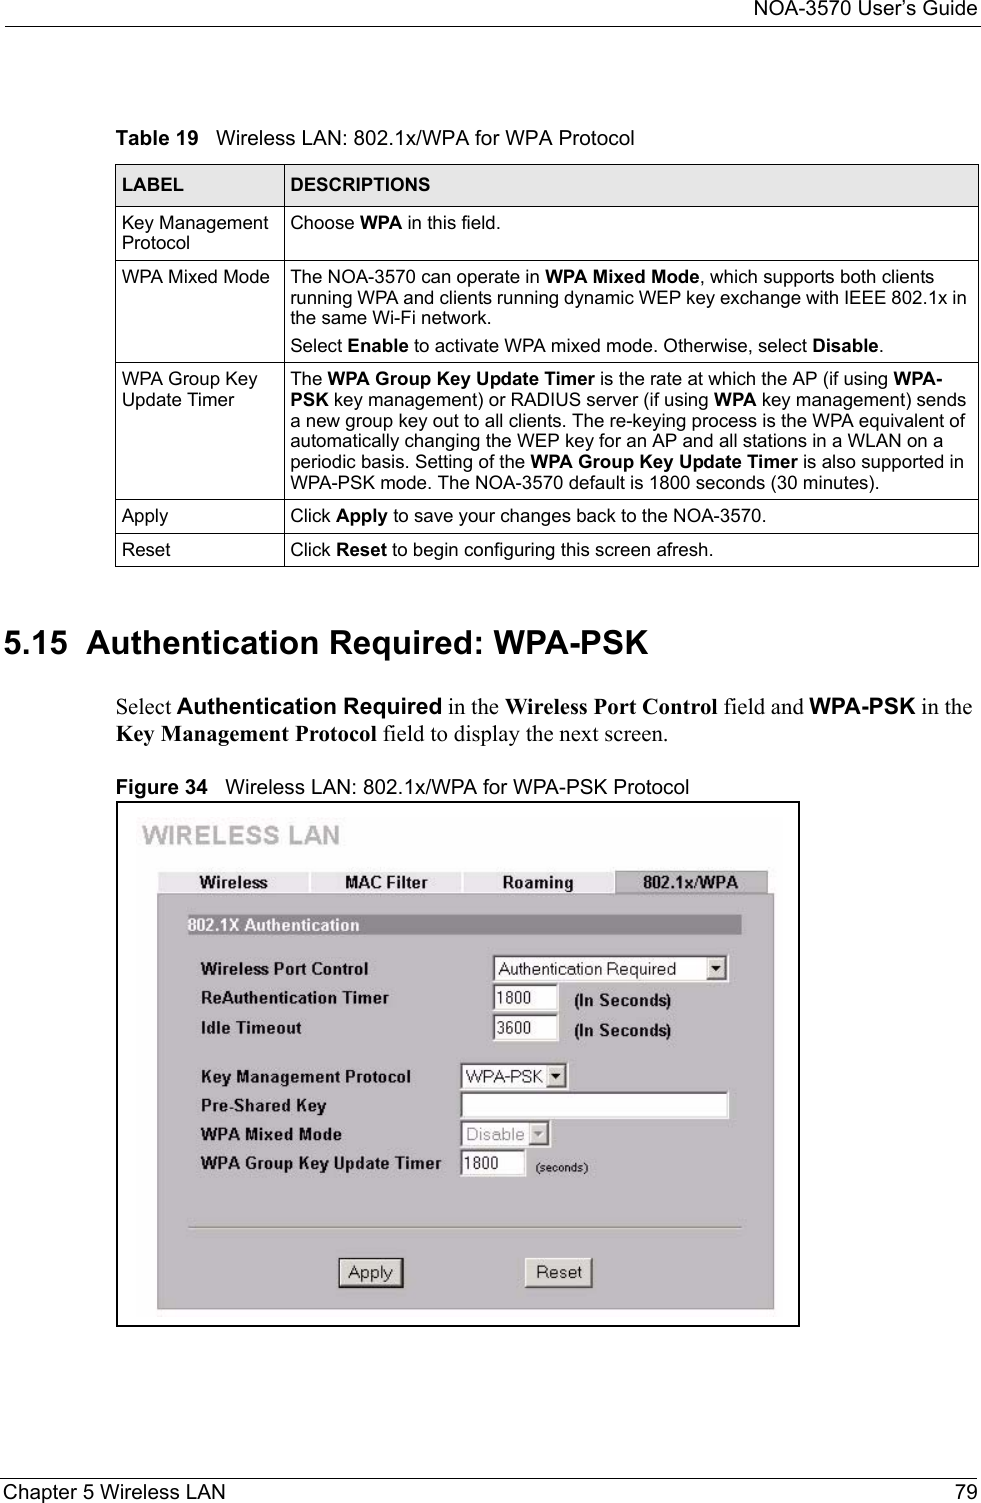 NOA-3570 User’s GuideChapter 5 Wireless LAN 795.15  Authentication Required: WPA-PSKSelect Authentication Required in the Wireless Port Control field and WPA-PSK in the Key Management Protocol field to display the next screen.Figure 34   Wireless LAN: 802.1x/WPA for WPA-PSK ProtocolTable 19   Wireless LAN: 802.1x/WPA for WPA ProtocolLABEL DESCRIPTIONSKey Management ProtocolChoose WPA in this field.WPA Mixed Mode The NOA-3570 can operate in WPA Mixed Mode, which supports both clients running WPA and clients running dynamic WEP key exchange with IEEE 802.1x in the same Wi-Fi network.Select Enable to activate WPA mixed mode. Otherwise, select Disable. WPA Group Key Update TimerThe WPA Group Key Update Timer is the rate at which the AP (if using WPA-PSK key management) or RADIUS server (if using WPA key management) sends a new group key out to all clients. The re-keying process is the WPA equivalent of automatically changing the WEP key for an AP and all stations in a WLAN on a periodic basis. Setting of the WPA Group Key Update Timer is also supported in WPA-PSK mode. The NOA-3570 default is 1800 seconds (30 minutes). Apply Click Apply to save your changes back to the NOA-3570.Reset Click Reset to begin configuring this screen afresh.